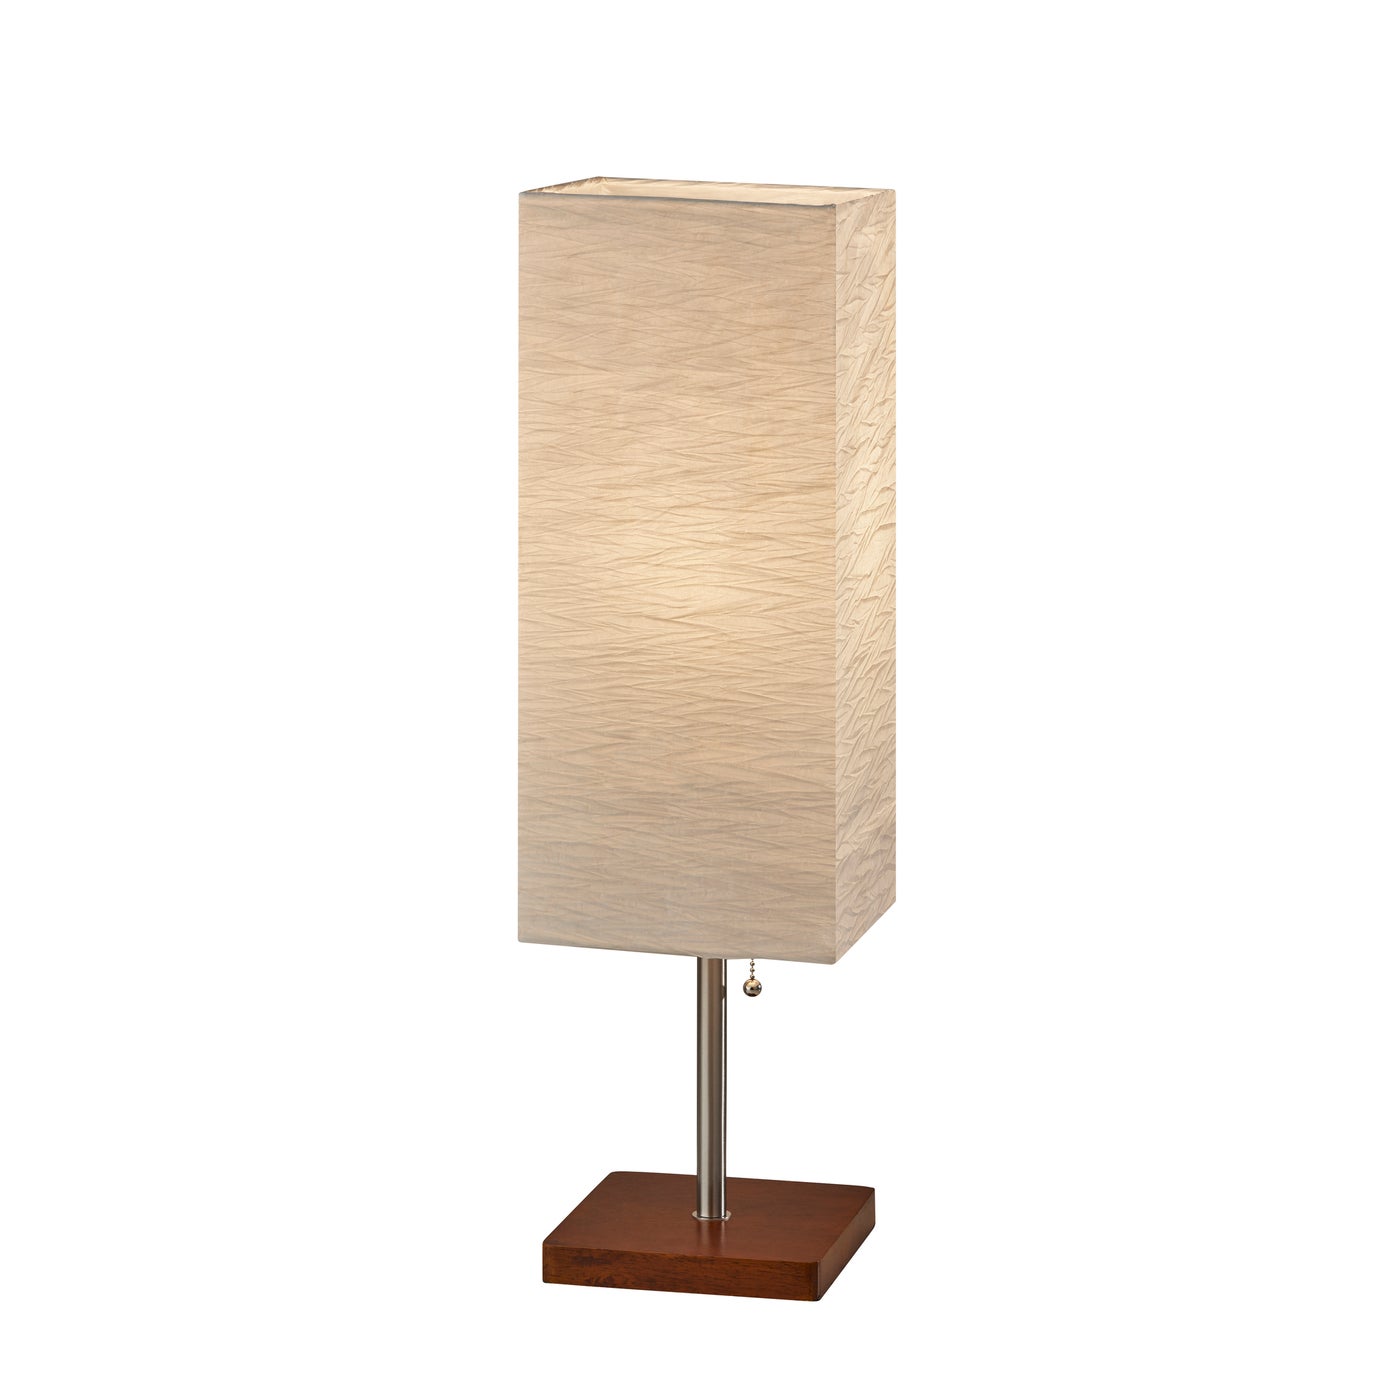 Adesso Home - 8021-15 - Table Lamp - Dune - Brushed Steel W. Walnut Rubberwood